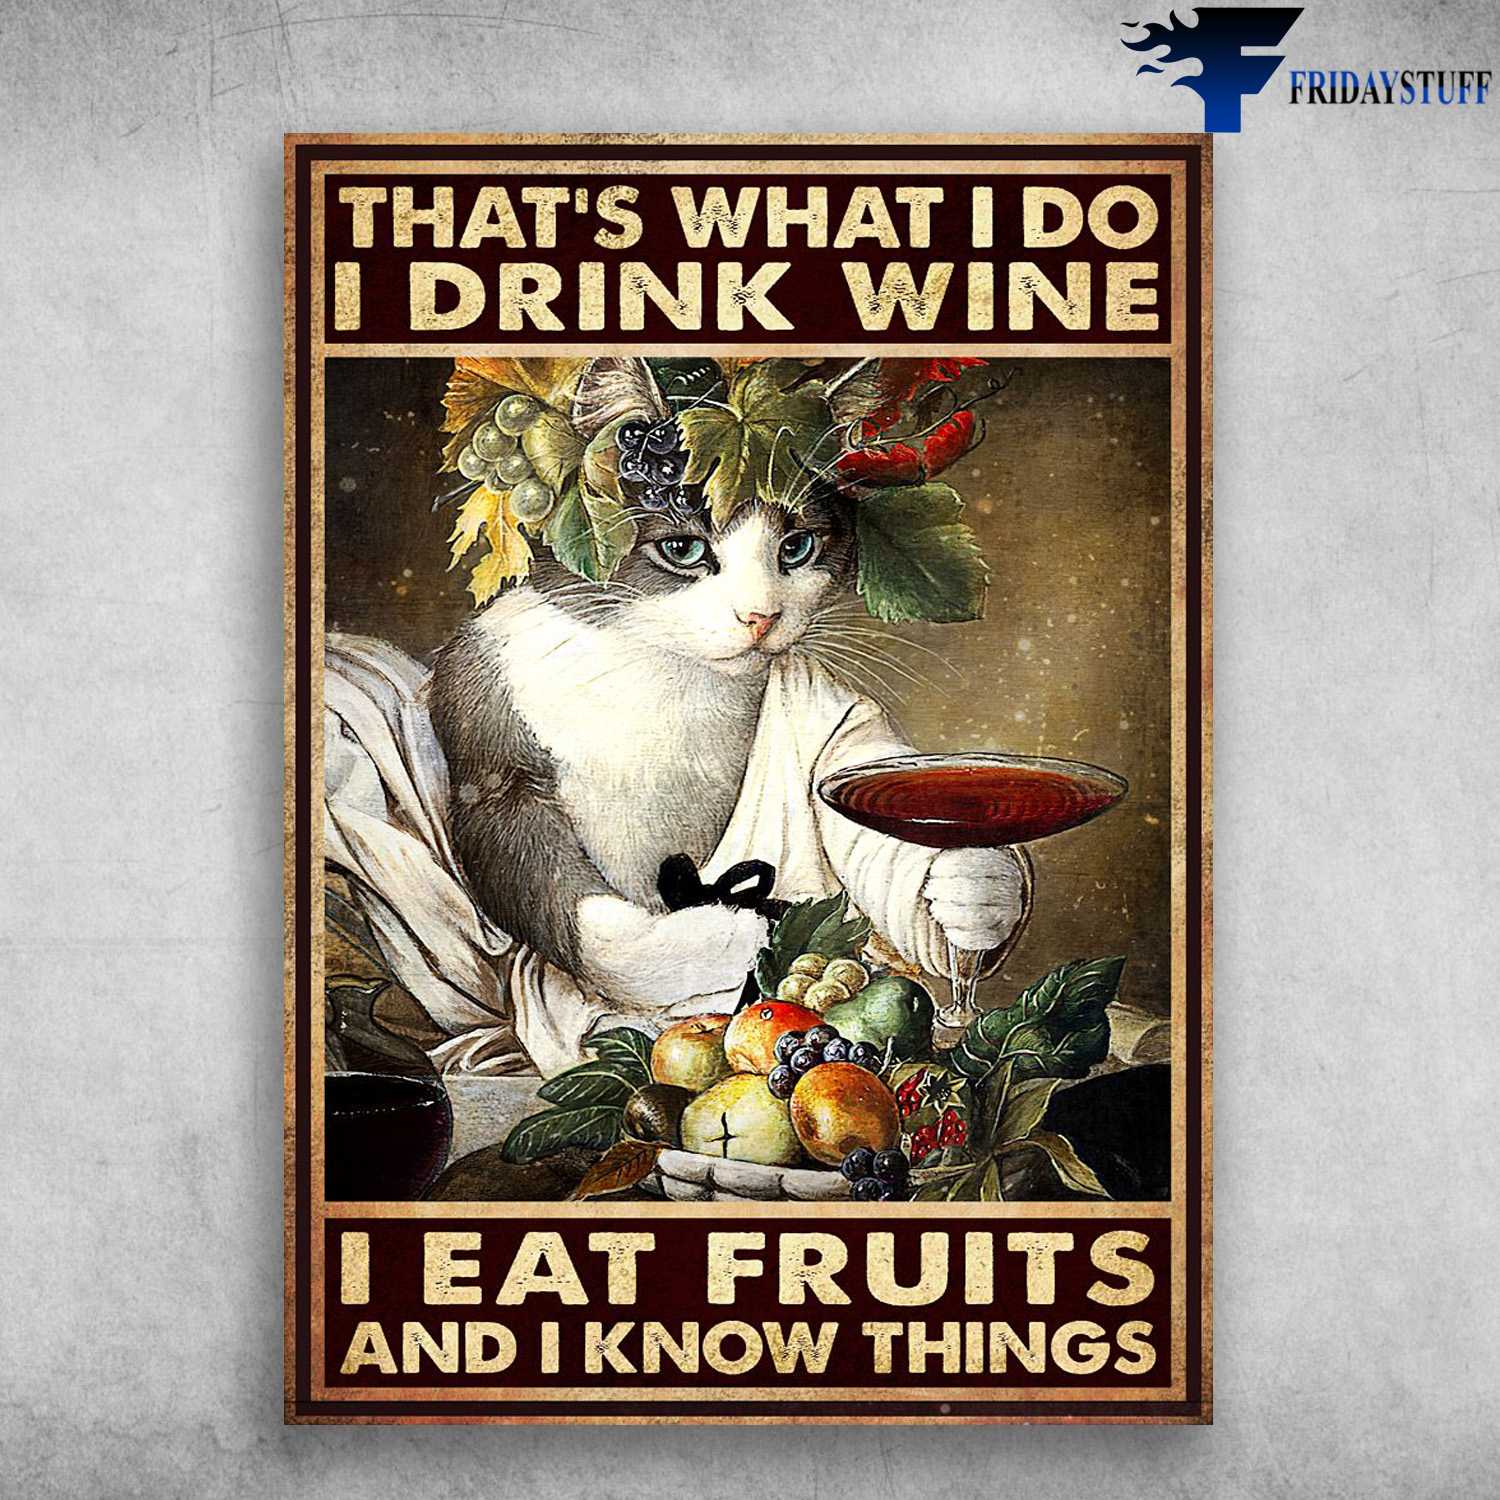 Cat Drinks Wine, Fruit Lover - That's What I Do, I Drink Wine, I Eat Fruits, And I Know Things